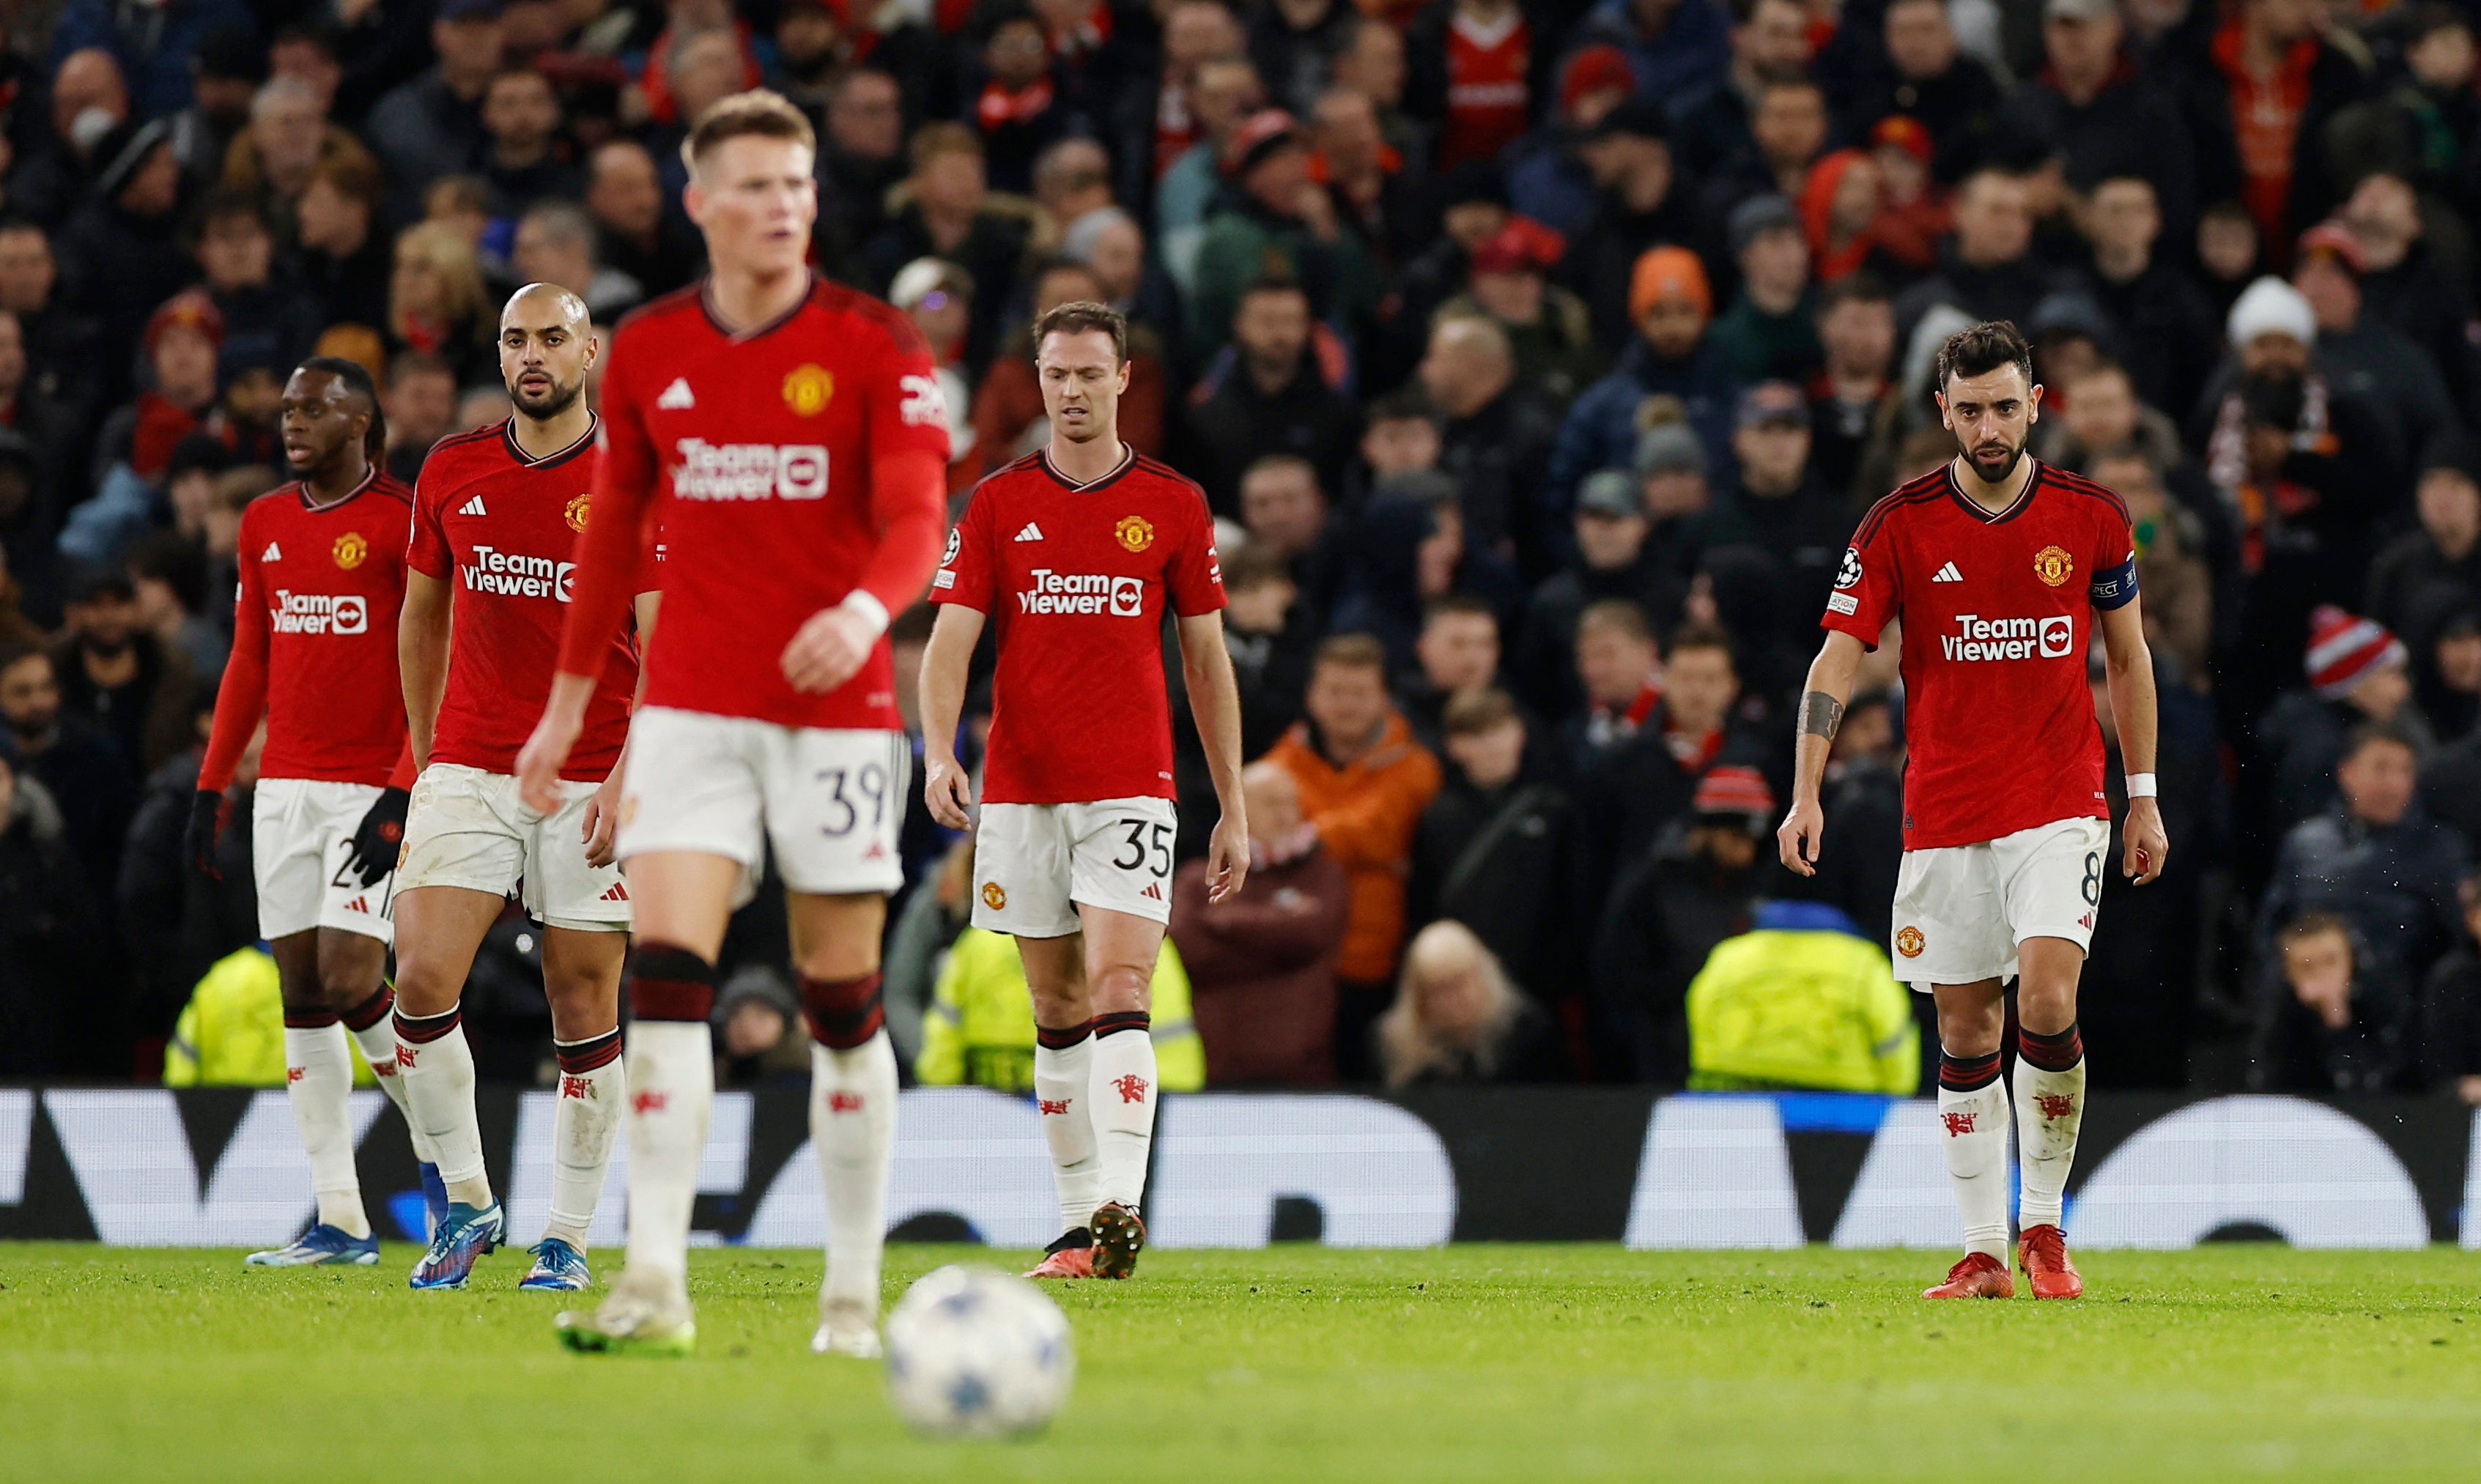 Out of ideas and out of Europe, Manchester United toil again in lacklustre defeat to Bayern Munich | The Independent